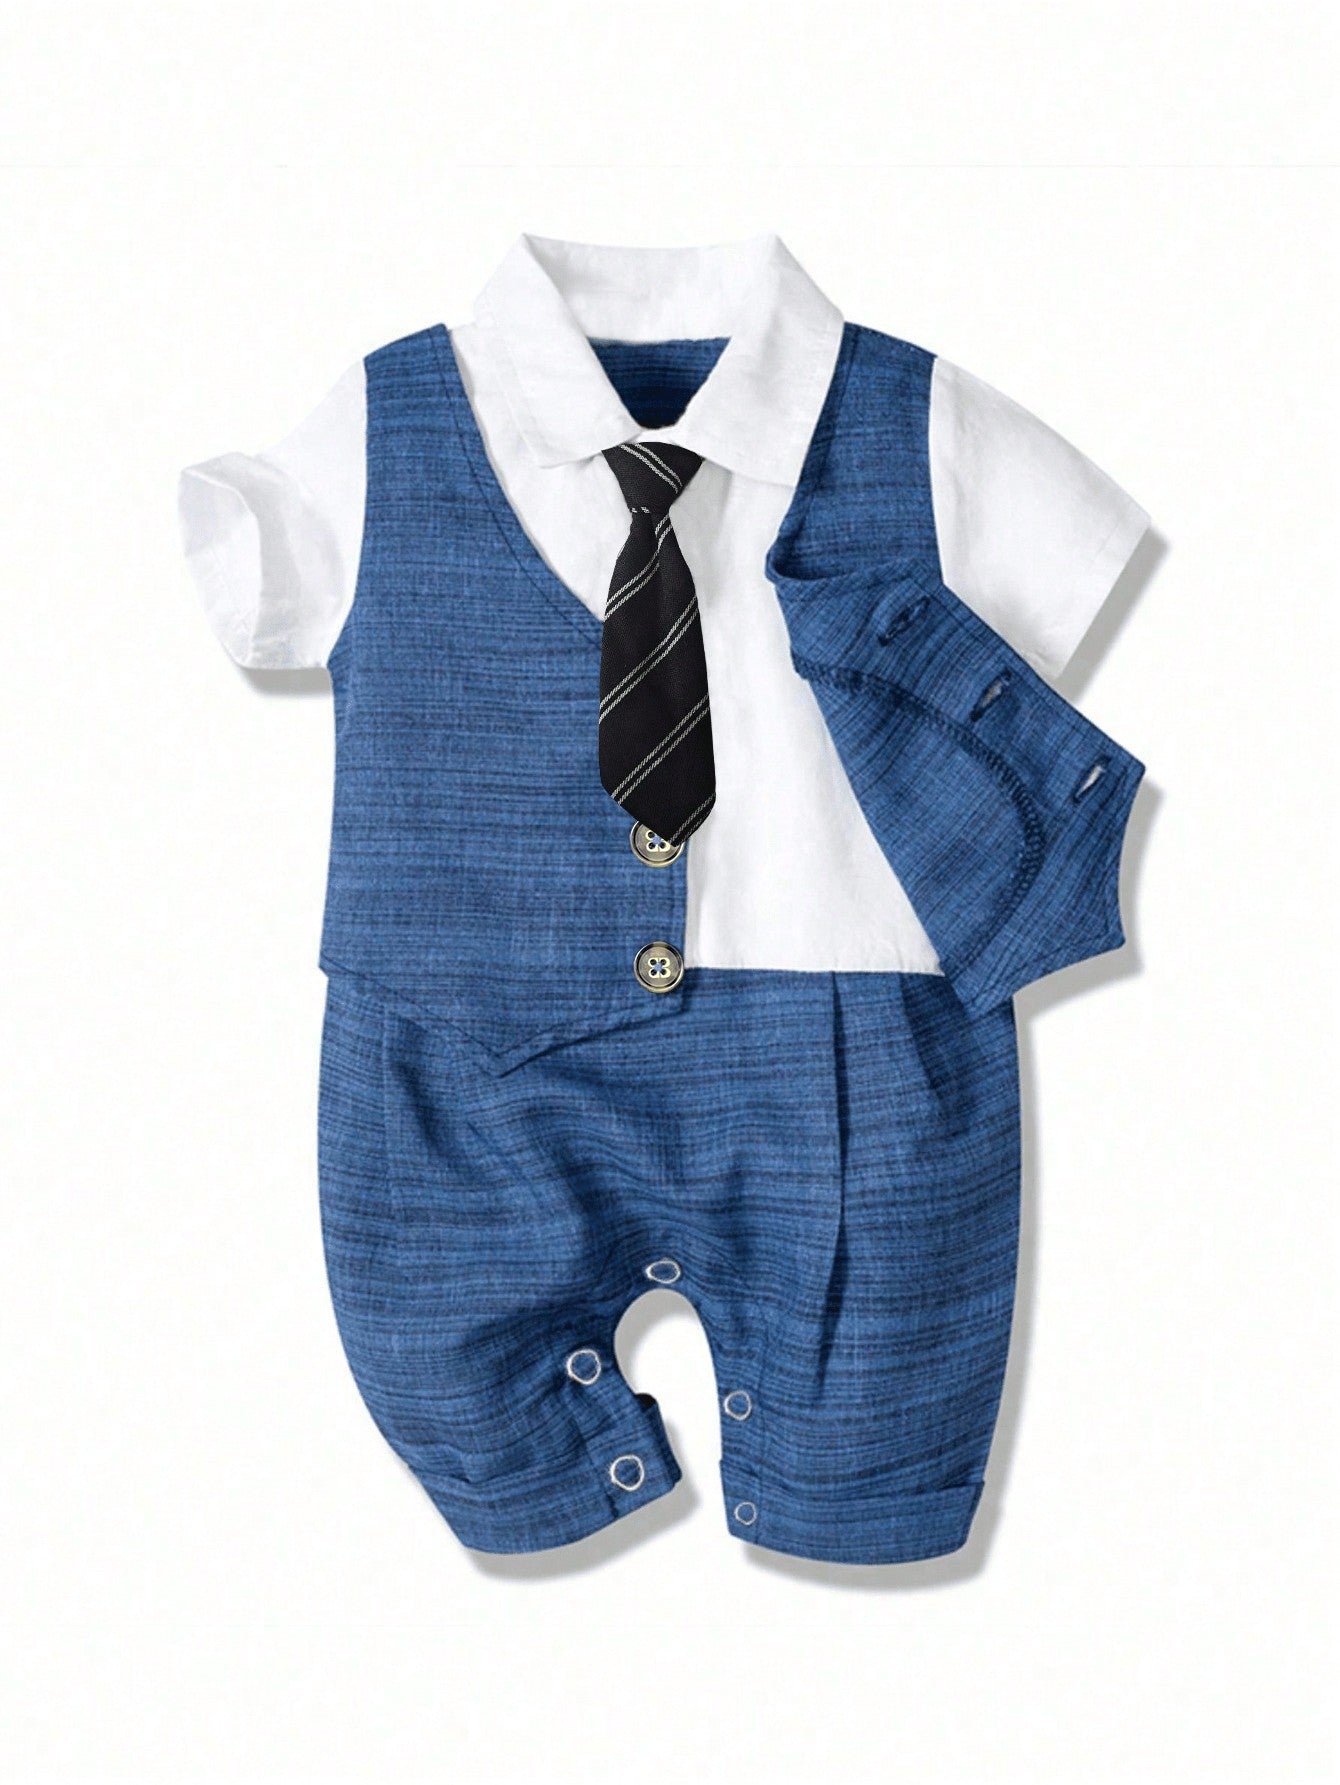 Baby Boy Summer Gentleman Style False 2 In 1 Suit With Top And Pants, Birthday Outfit